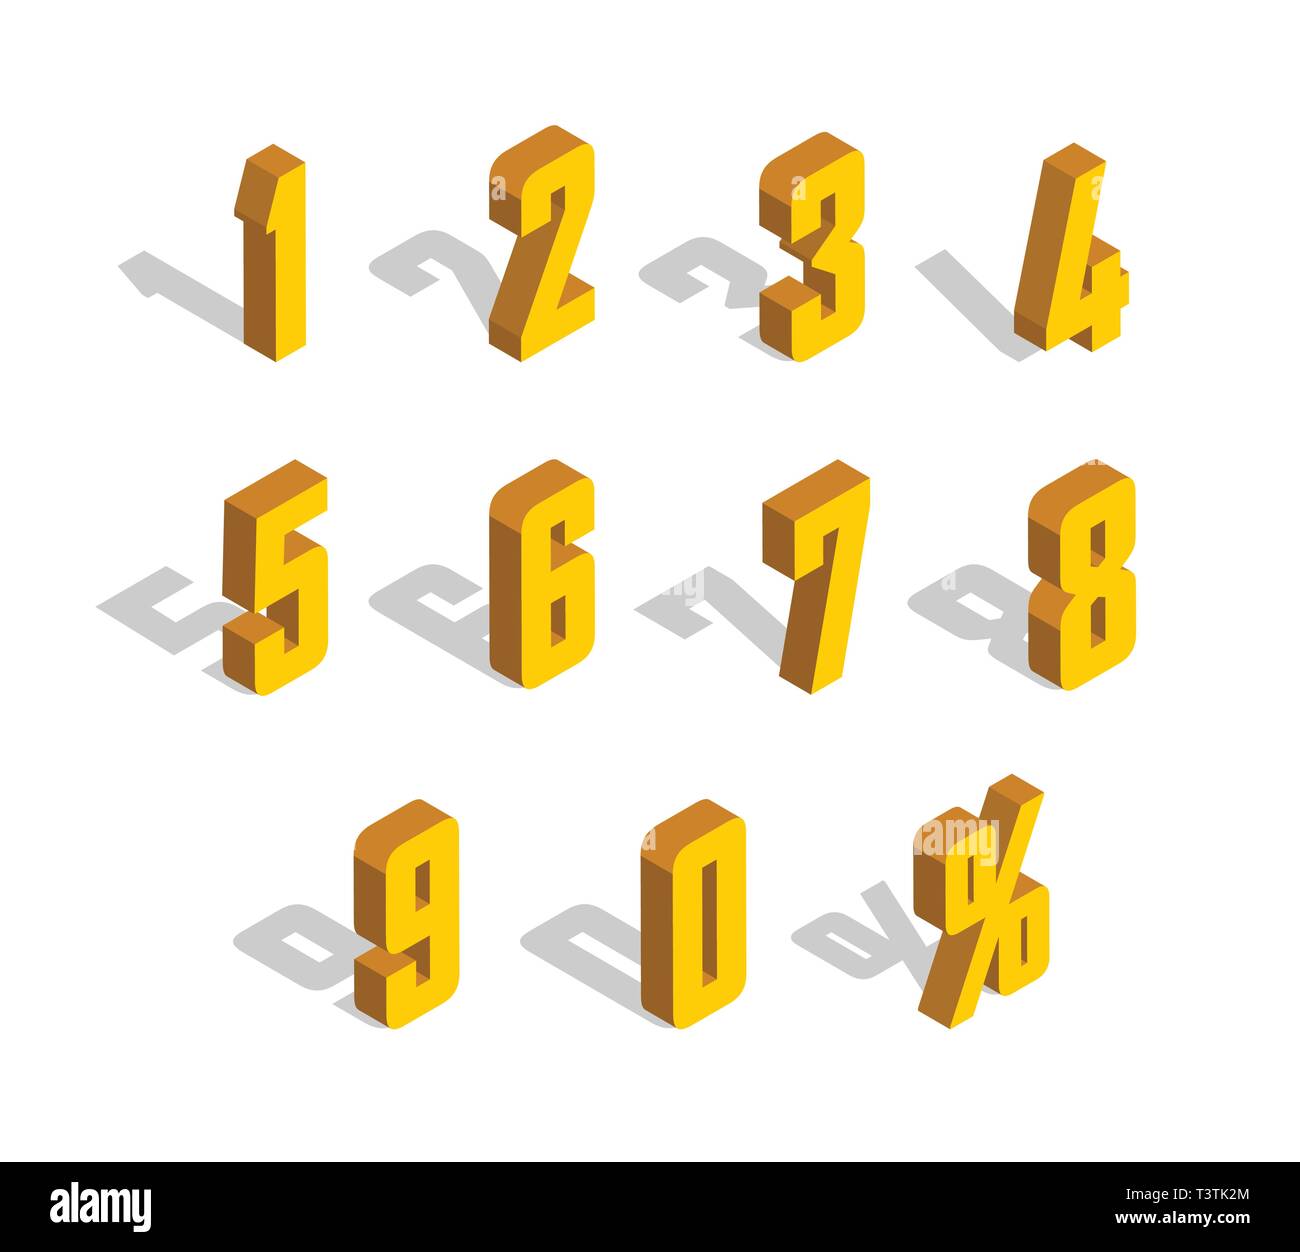 3D golden-yellow Isometric Letter. 0, 1, 2, 3, 4, 5, 6, 7, 8, 9 numeral alphabet. Vector Isolated Number. Stock Vector